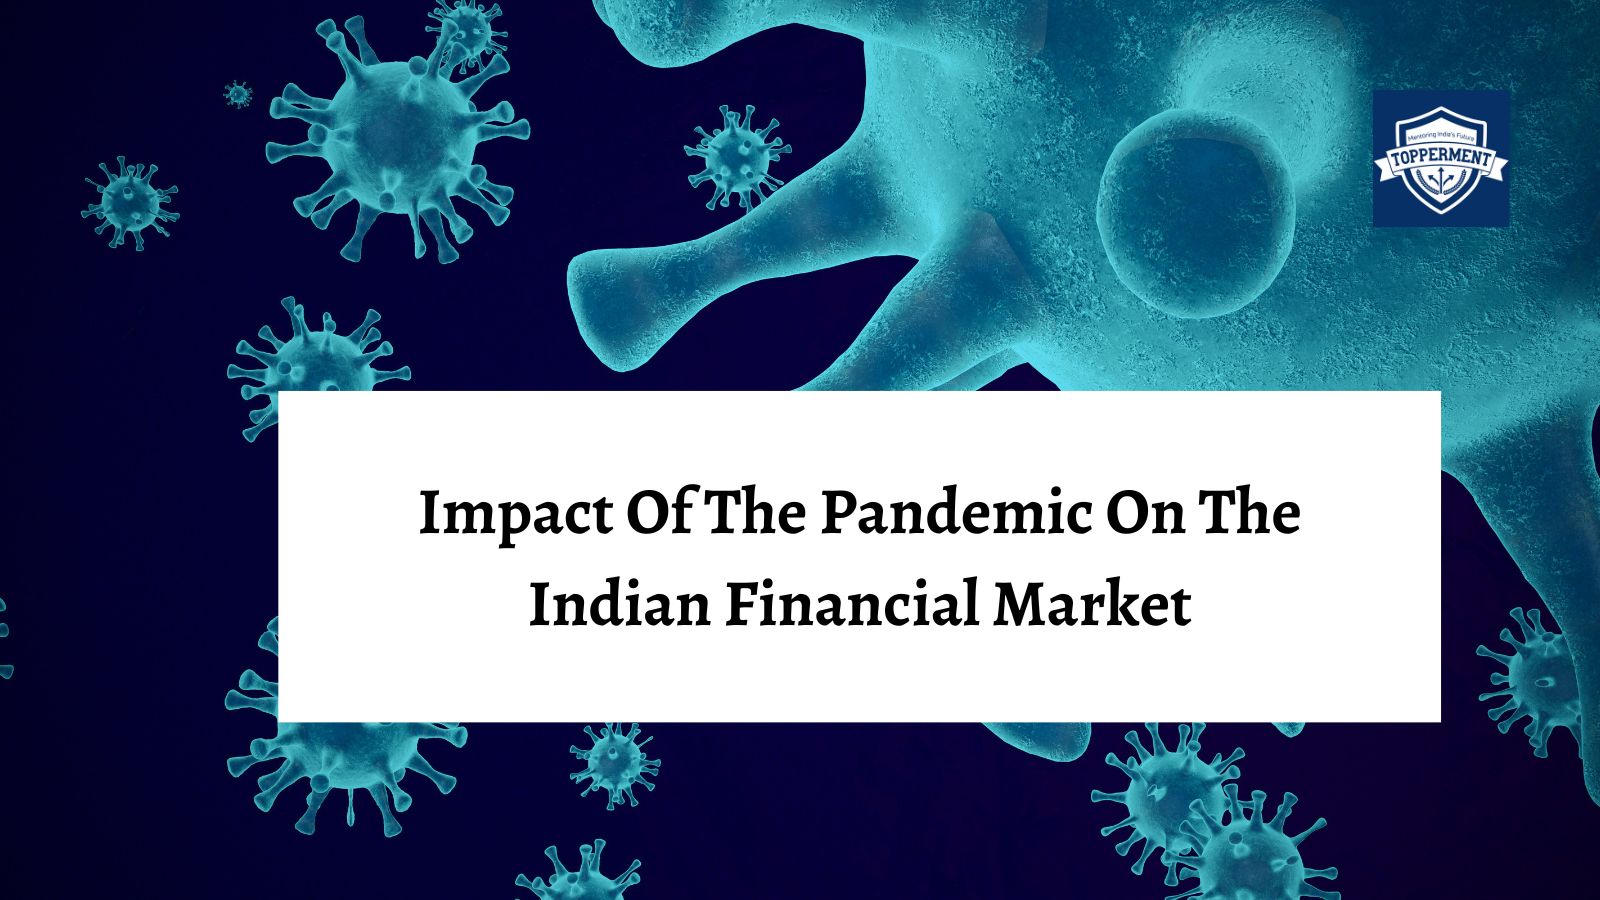 Impact of the Pandemic on the Indian Financial Market | Best UPSC IAS Coaching For Mentorship And Guidance